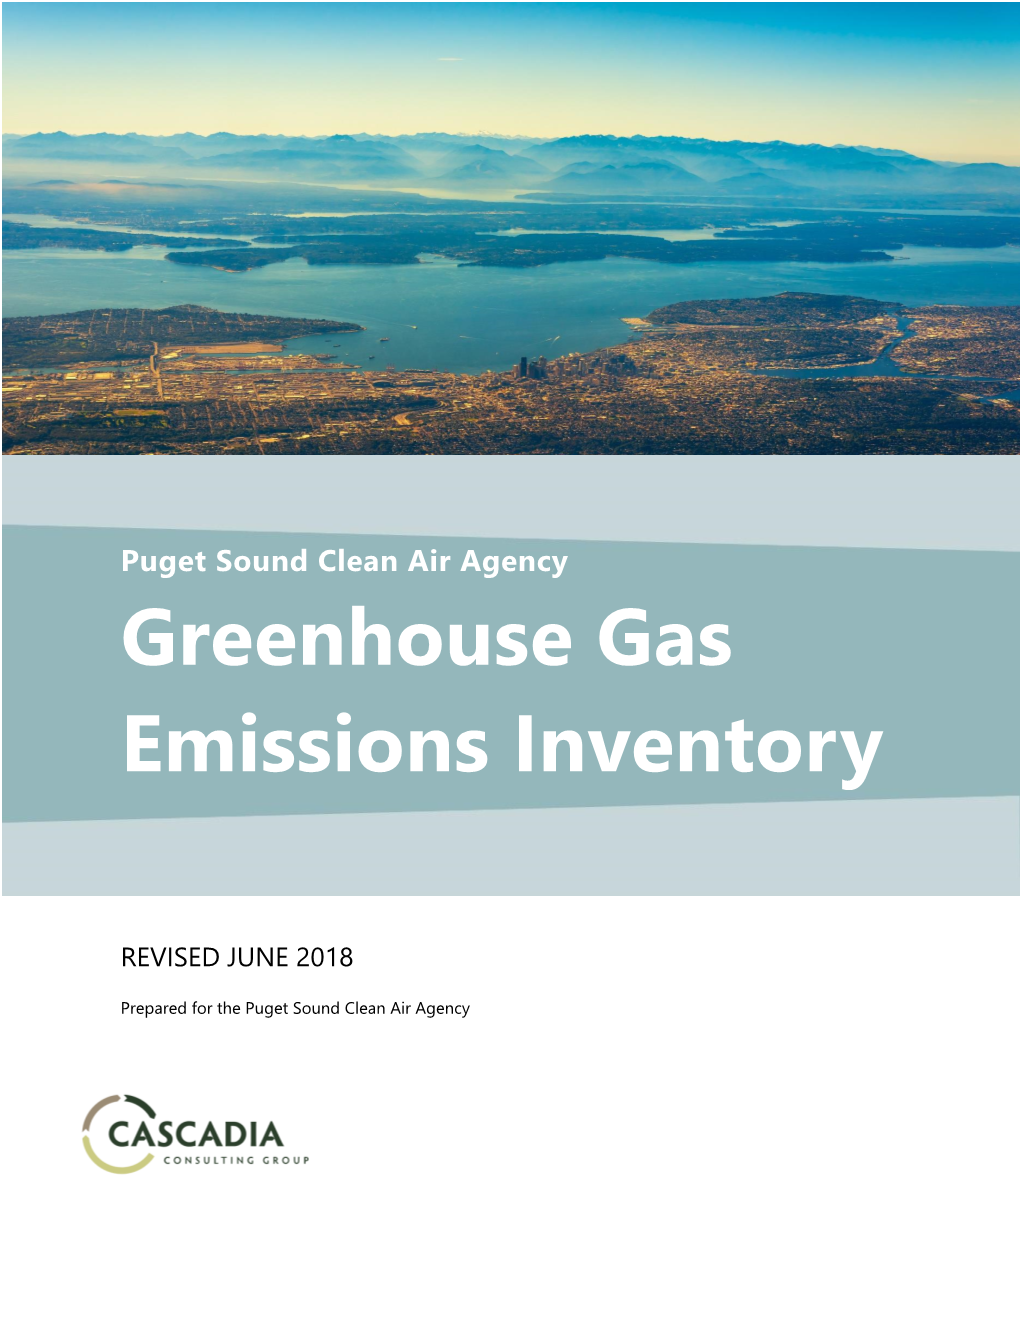 Puget Sound Clean Air Agency Greenhouse Gas Emissions Inventory